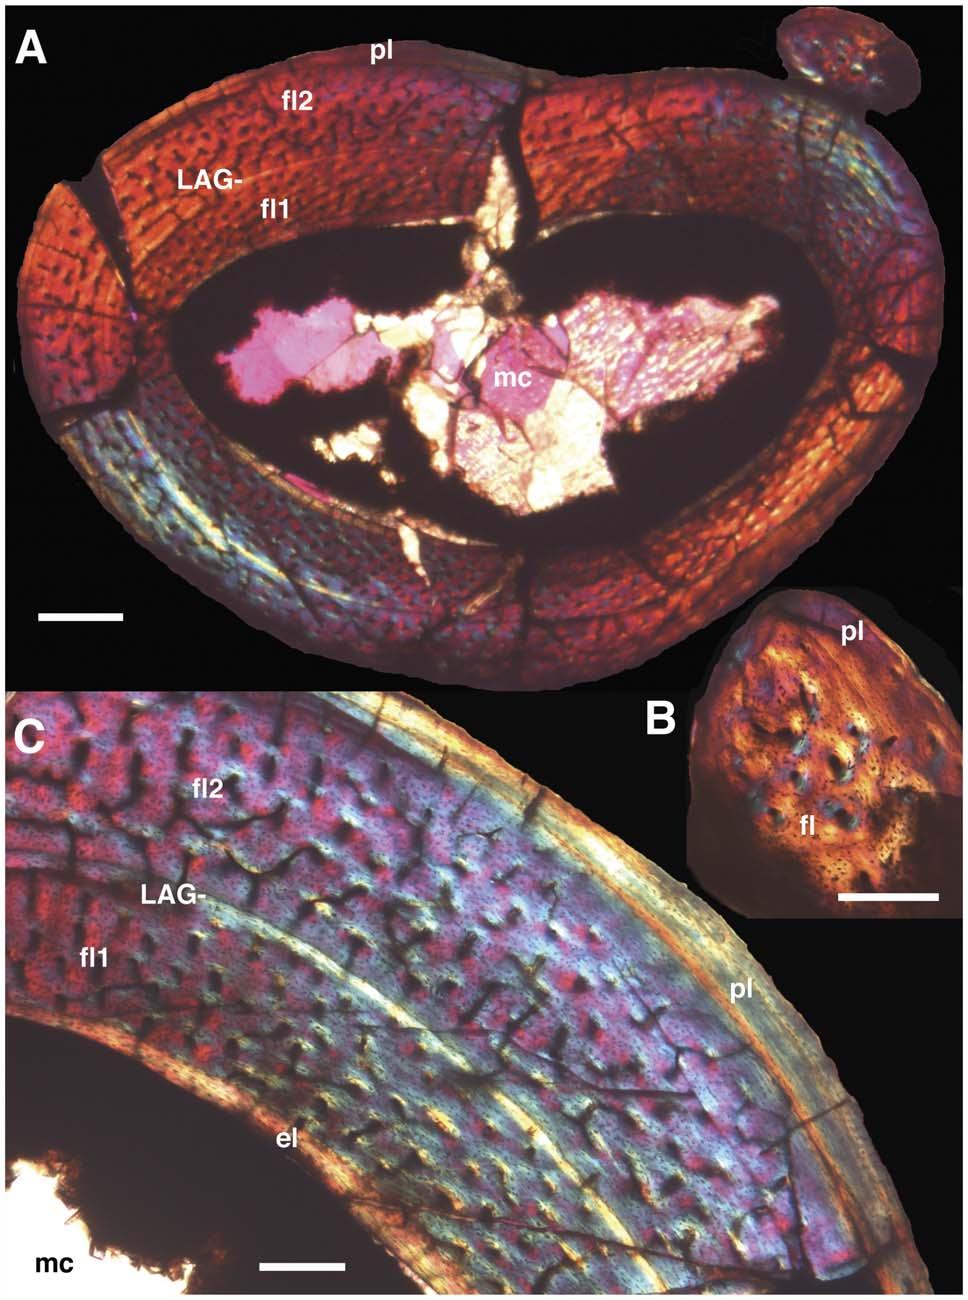 Figure 7. Histology of the right tibia and fibula of Mei long, DNHM D2514. A, cross-section of tibia and fibula in articulation. B, partial crosssection of fibula. C, partial cross-section of tibia.